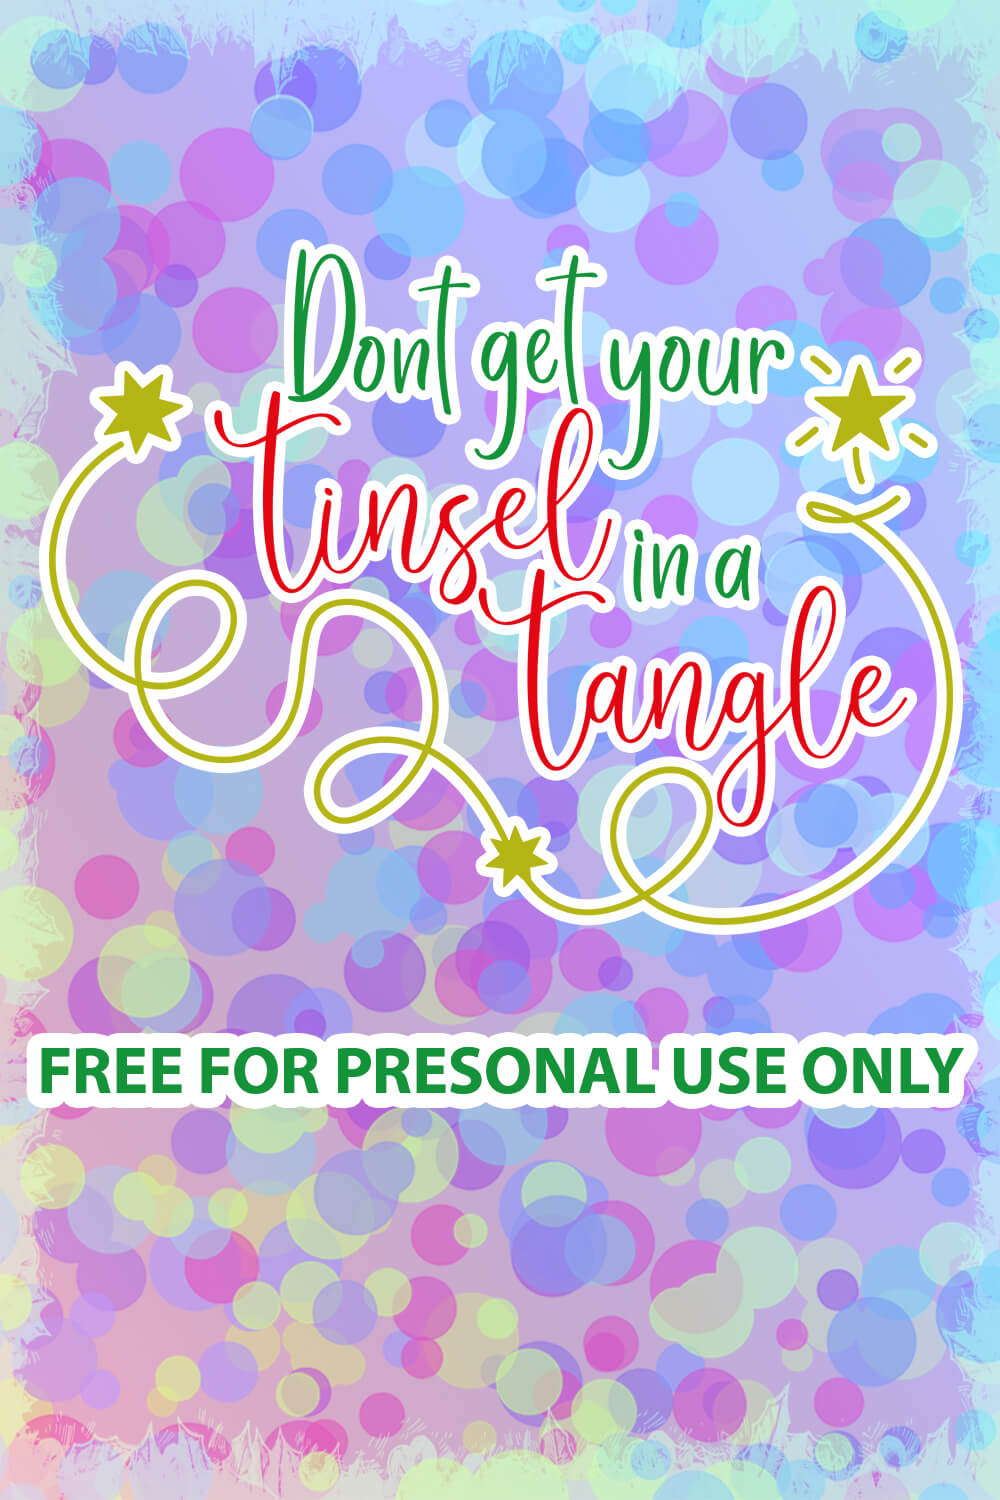 Tinsel in a tangle free SVG files pinterest image.